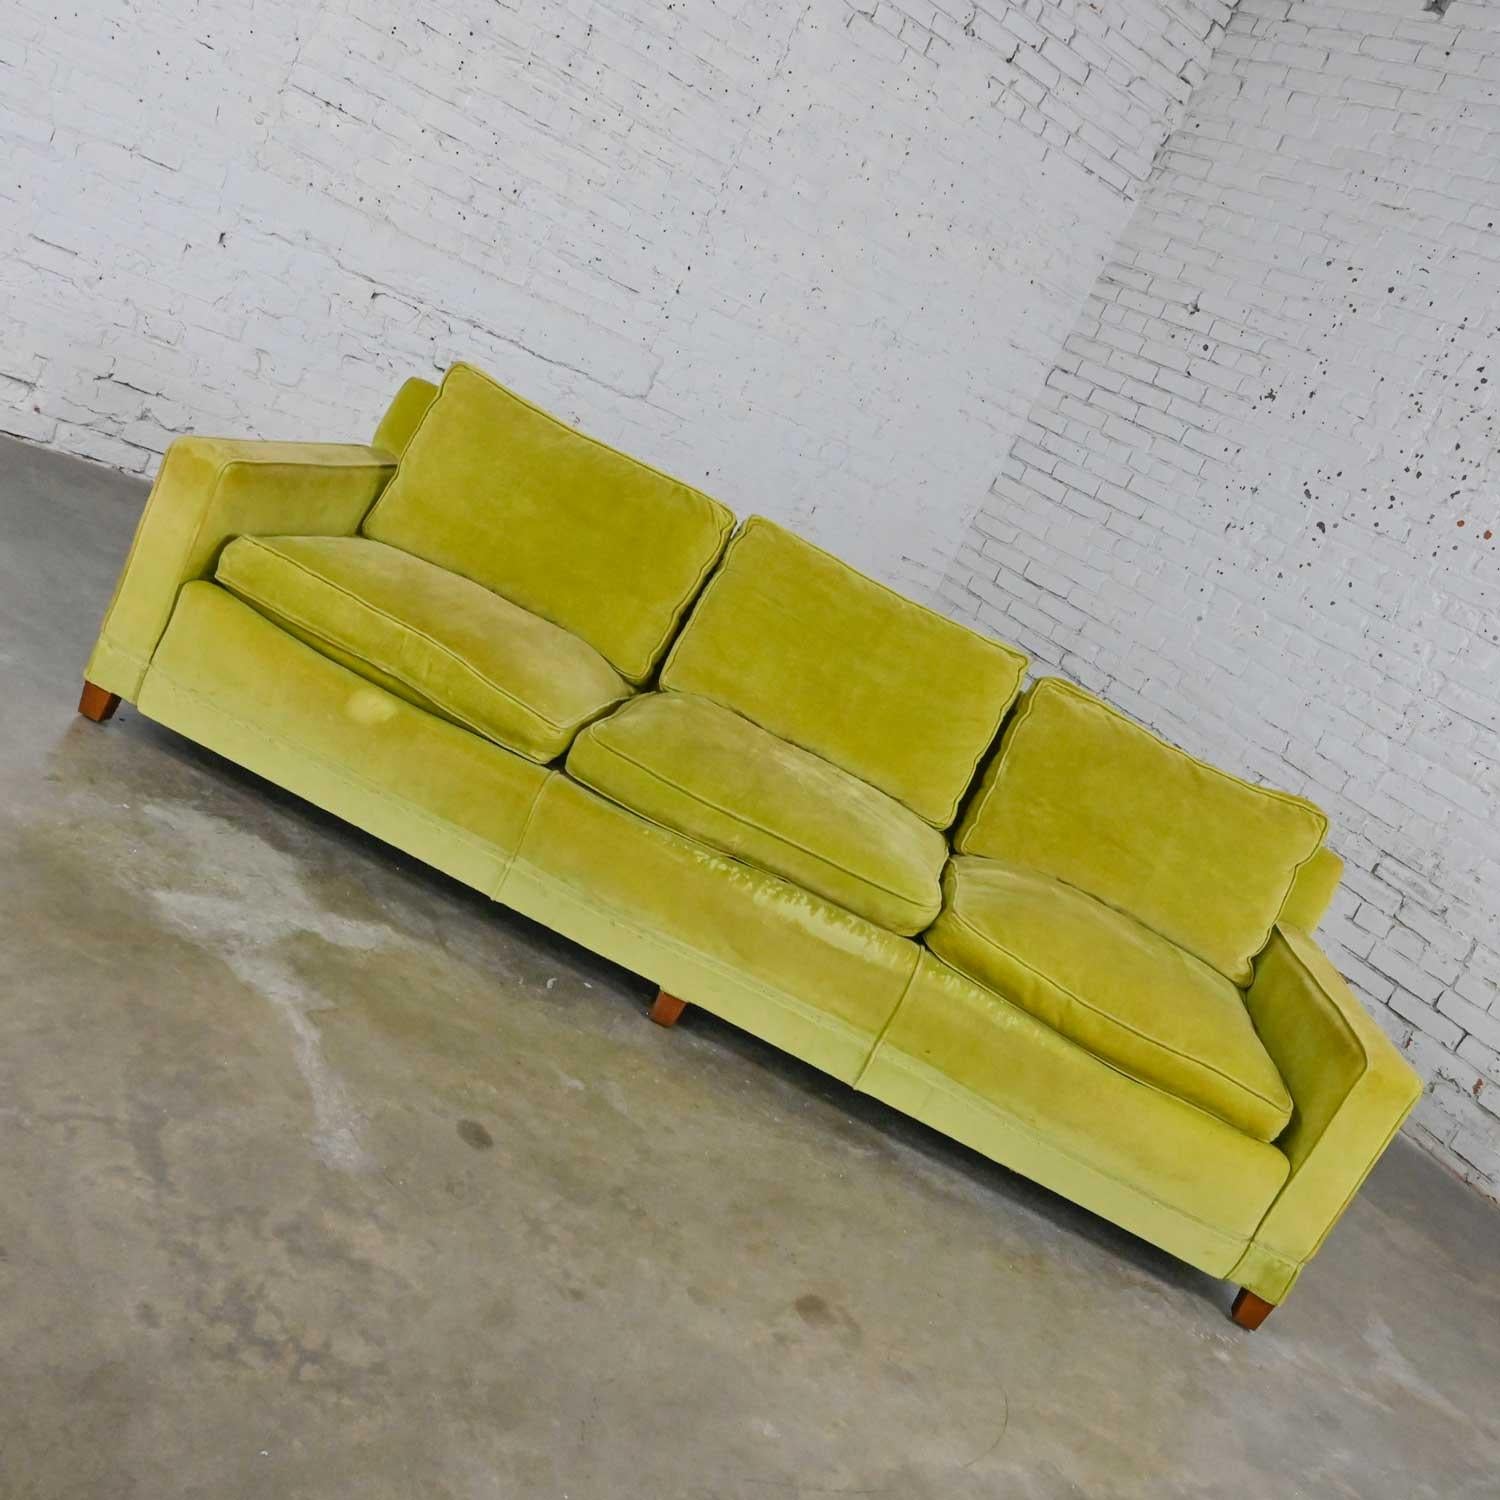 Unknown Vint Mid-Century Modern Feather Lawson Style Sofa Frame Only Needs Upholstered